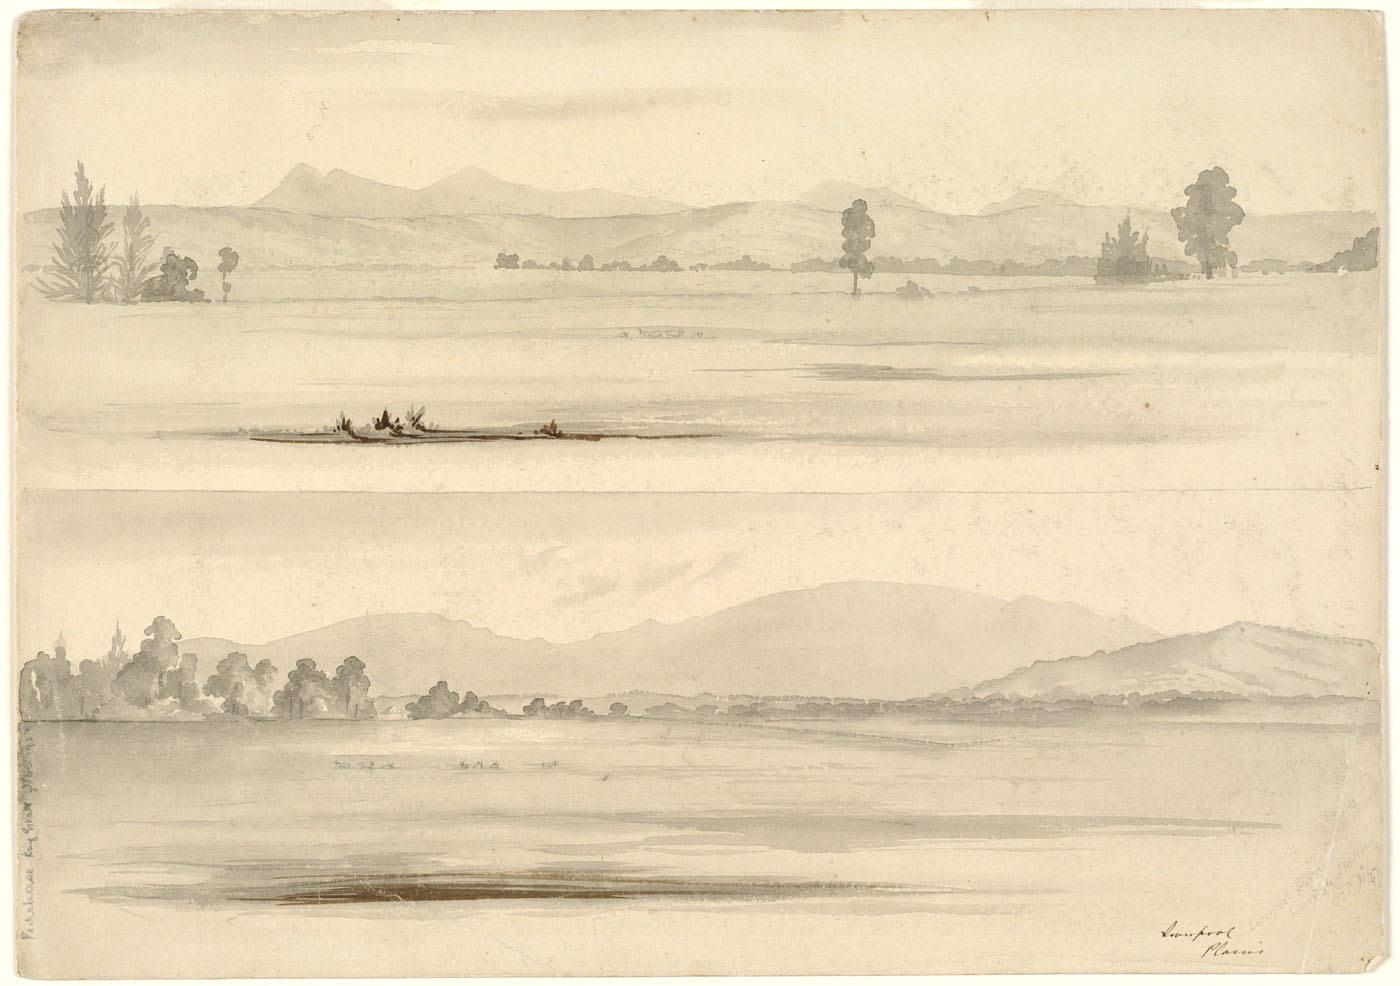 Watercolour painting of the Liverpool Plains, Warrah Estate, New South Wales, by Phillip Parker King, 1847 (Courtesy of the Mitchell Library, State Library of New South Wales).